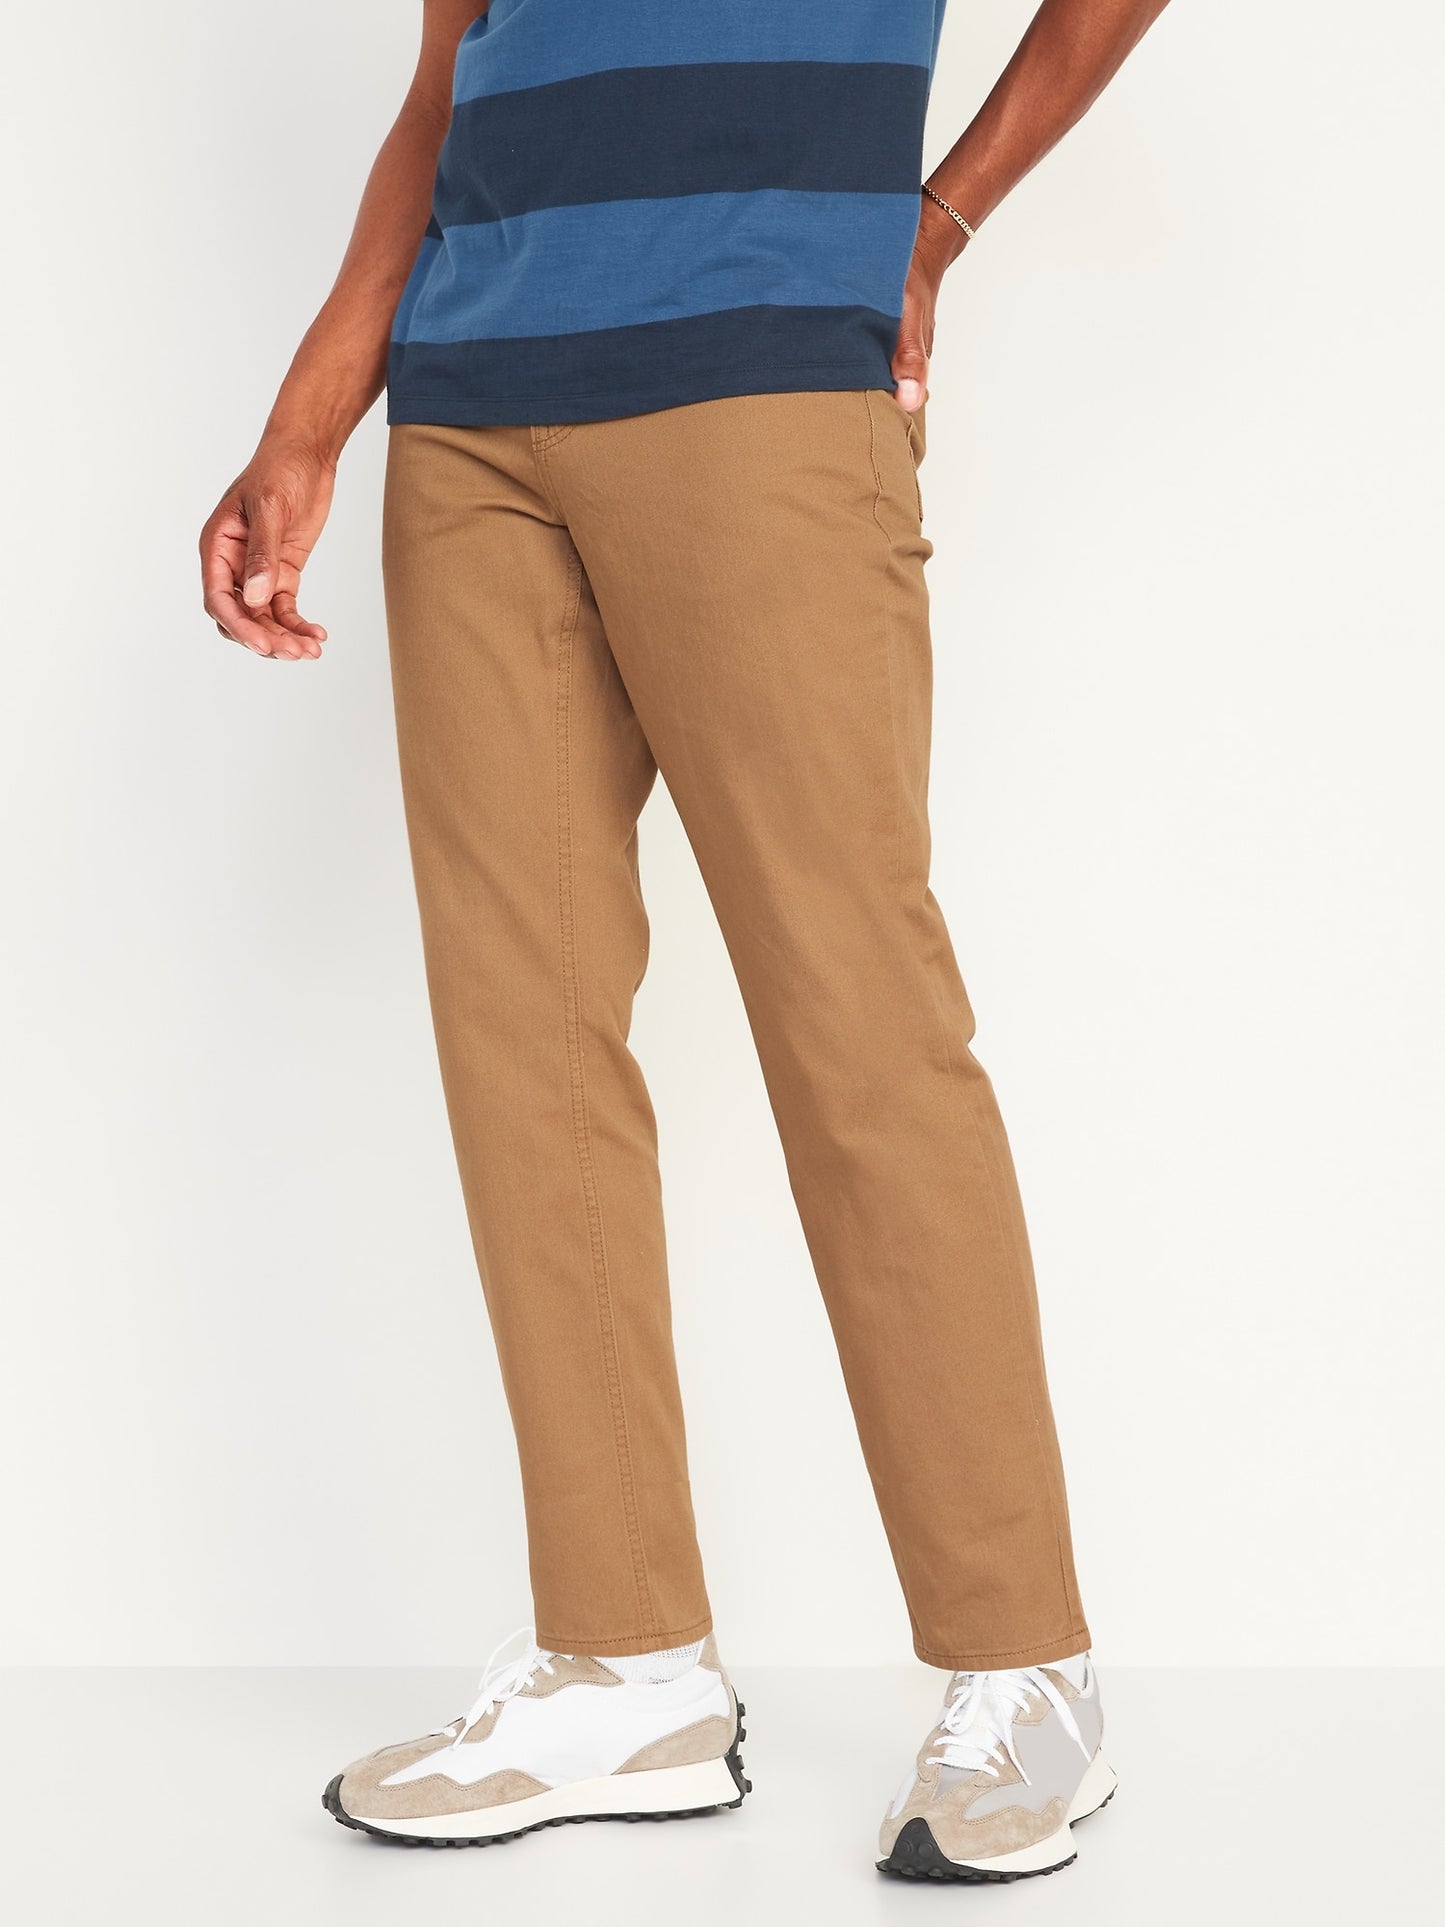 Old Navy Athletic Taper Non-Stretch Twill Five-Pocket Pants for Men